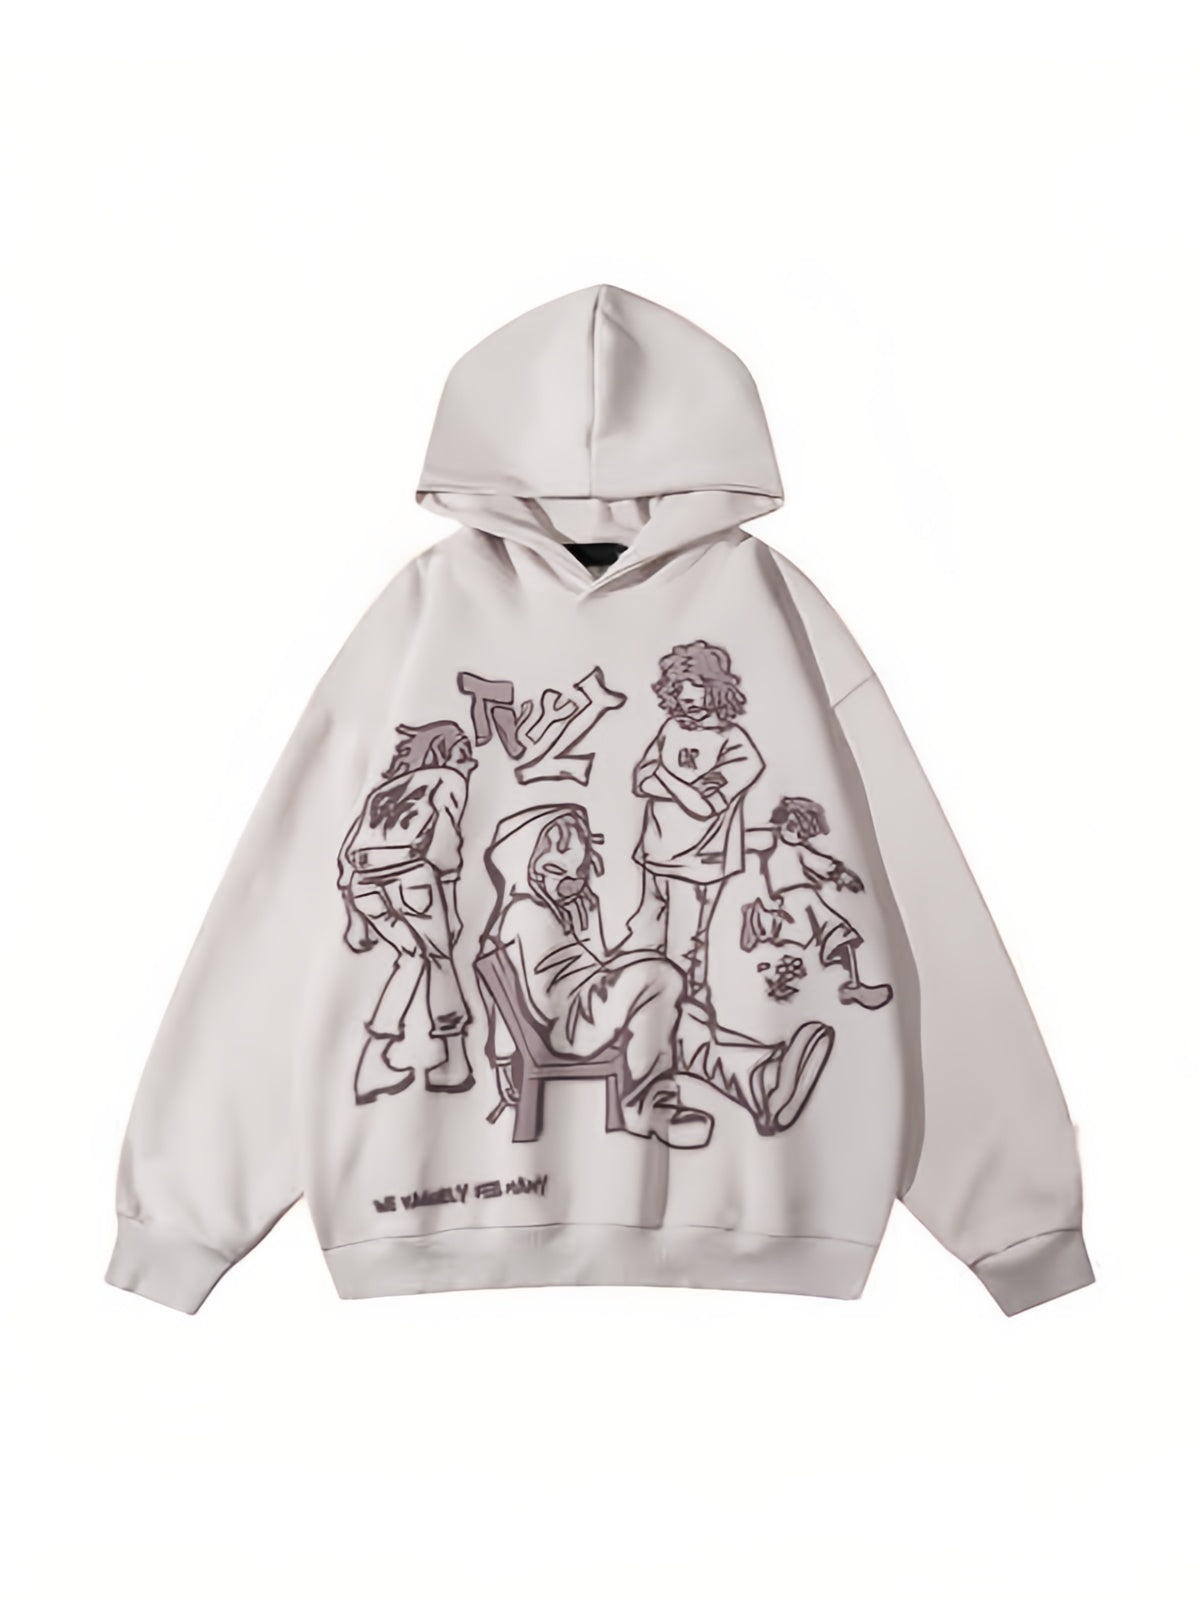 Oversized Hoodie with Hood and Graffiti Print